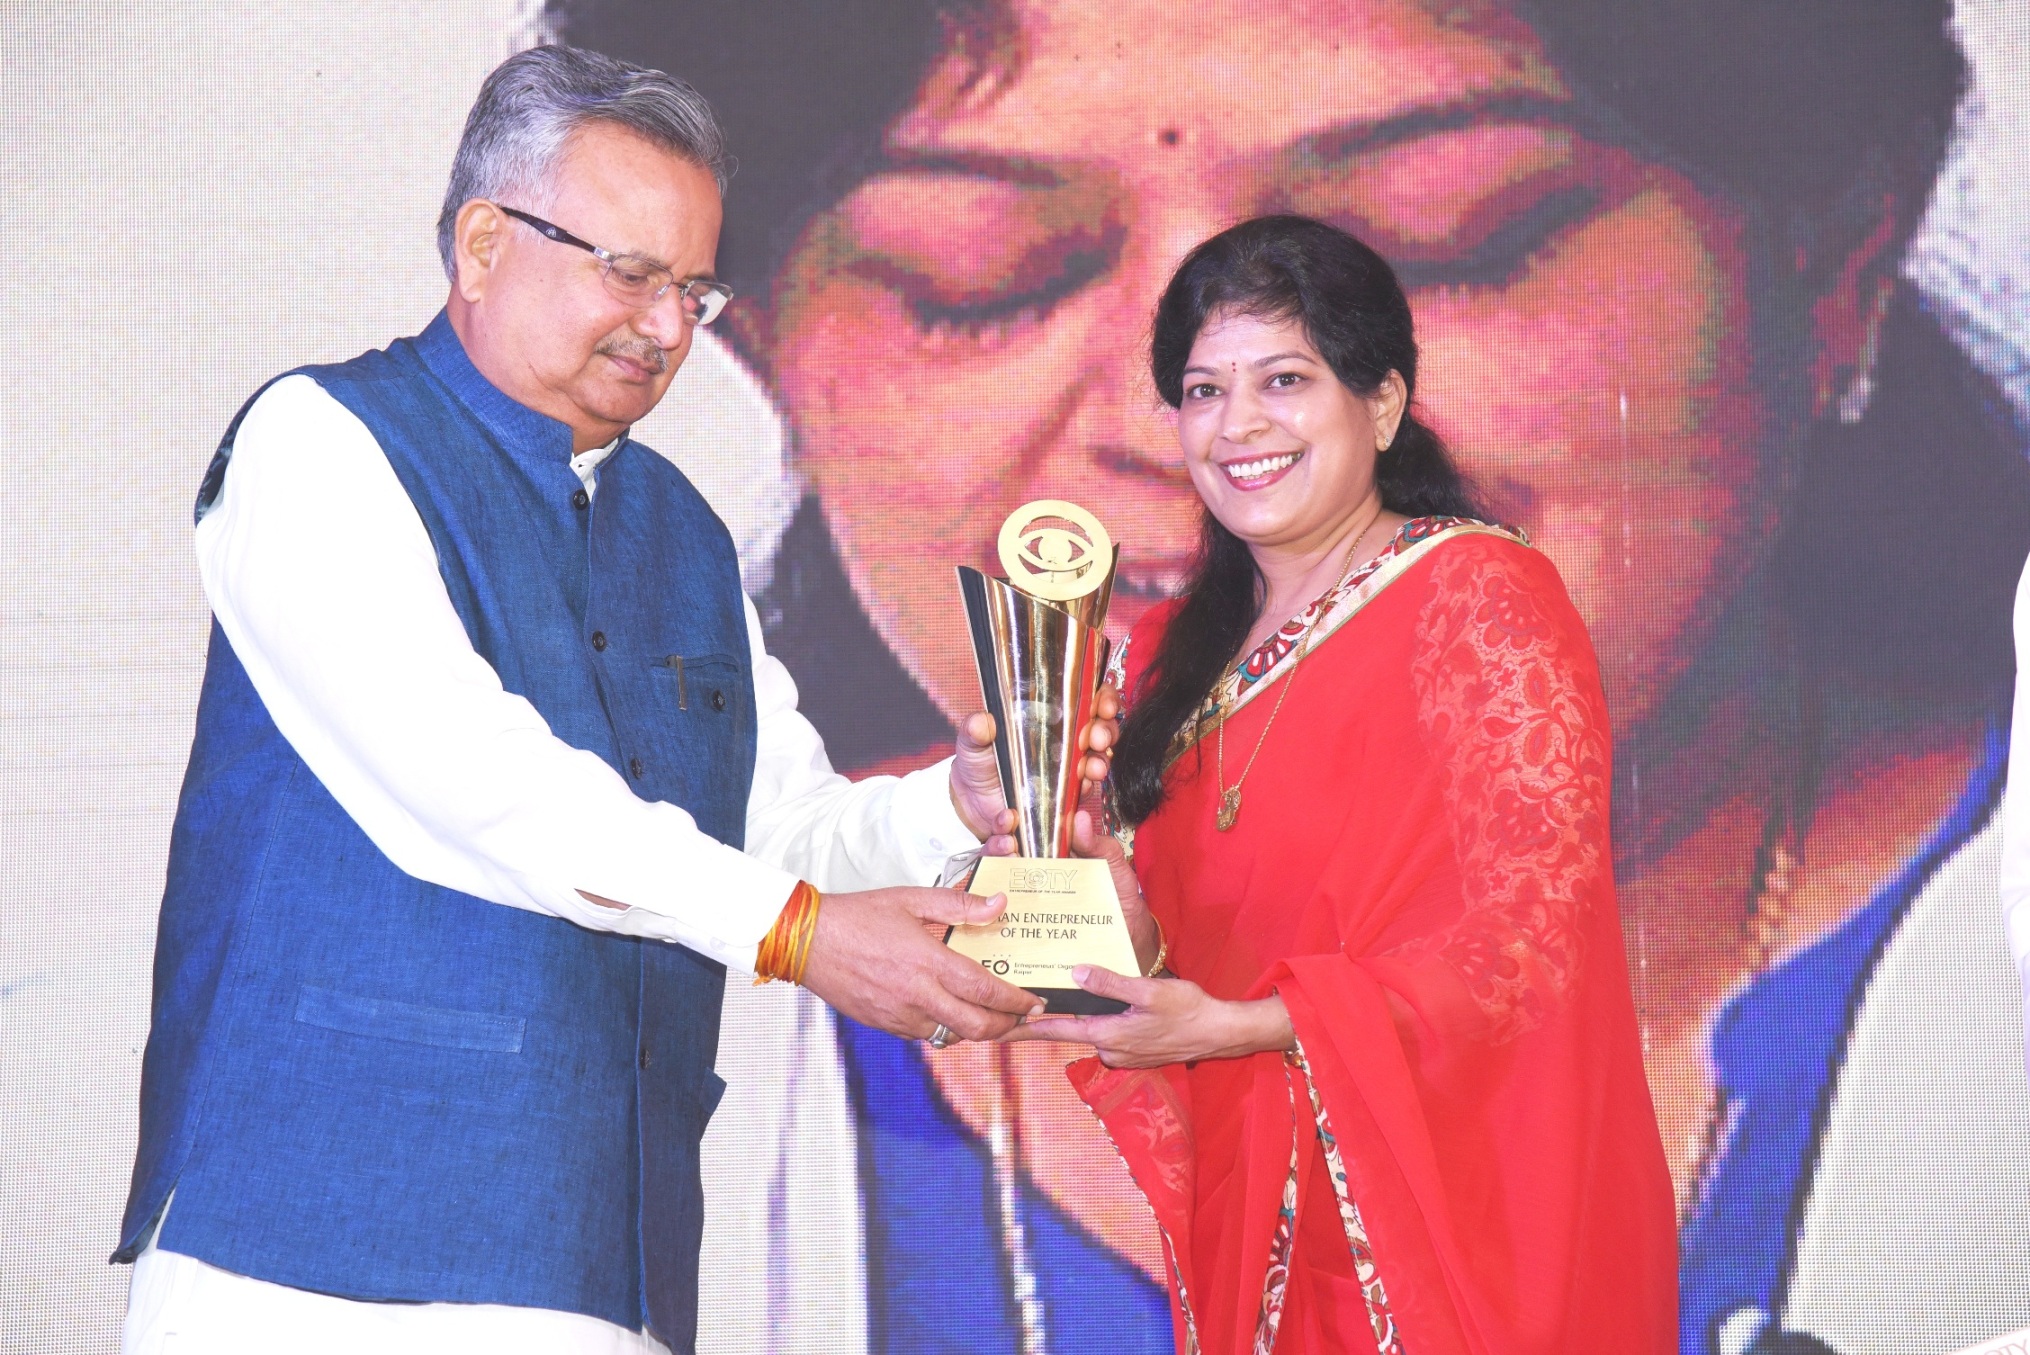 Ritu S. Jain, Director of SR Corporate Consultant Private Limited receives the Woman Entrepreneur of the Year Award.